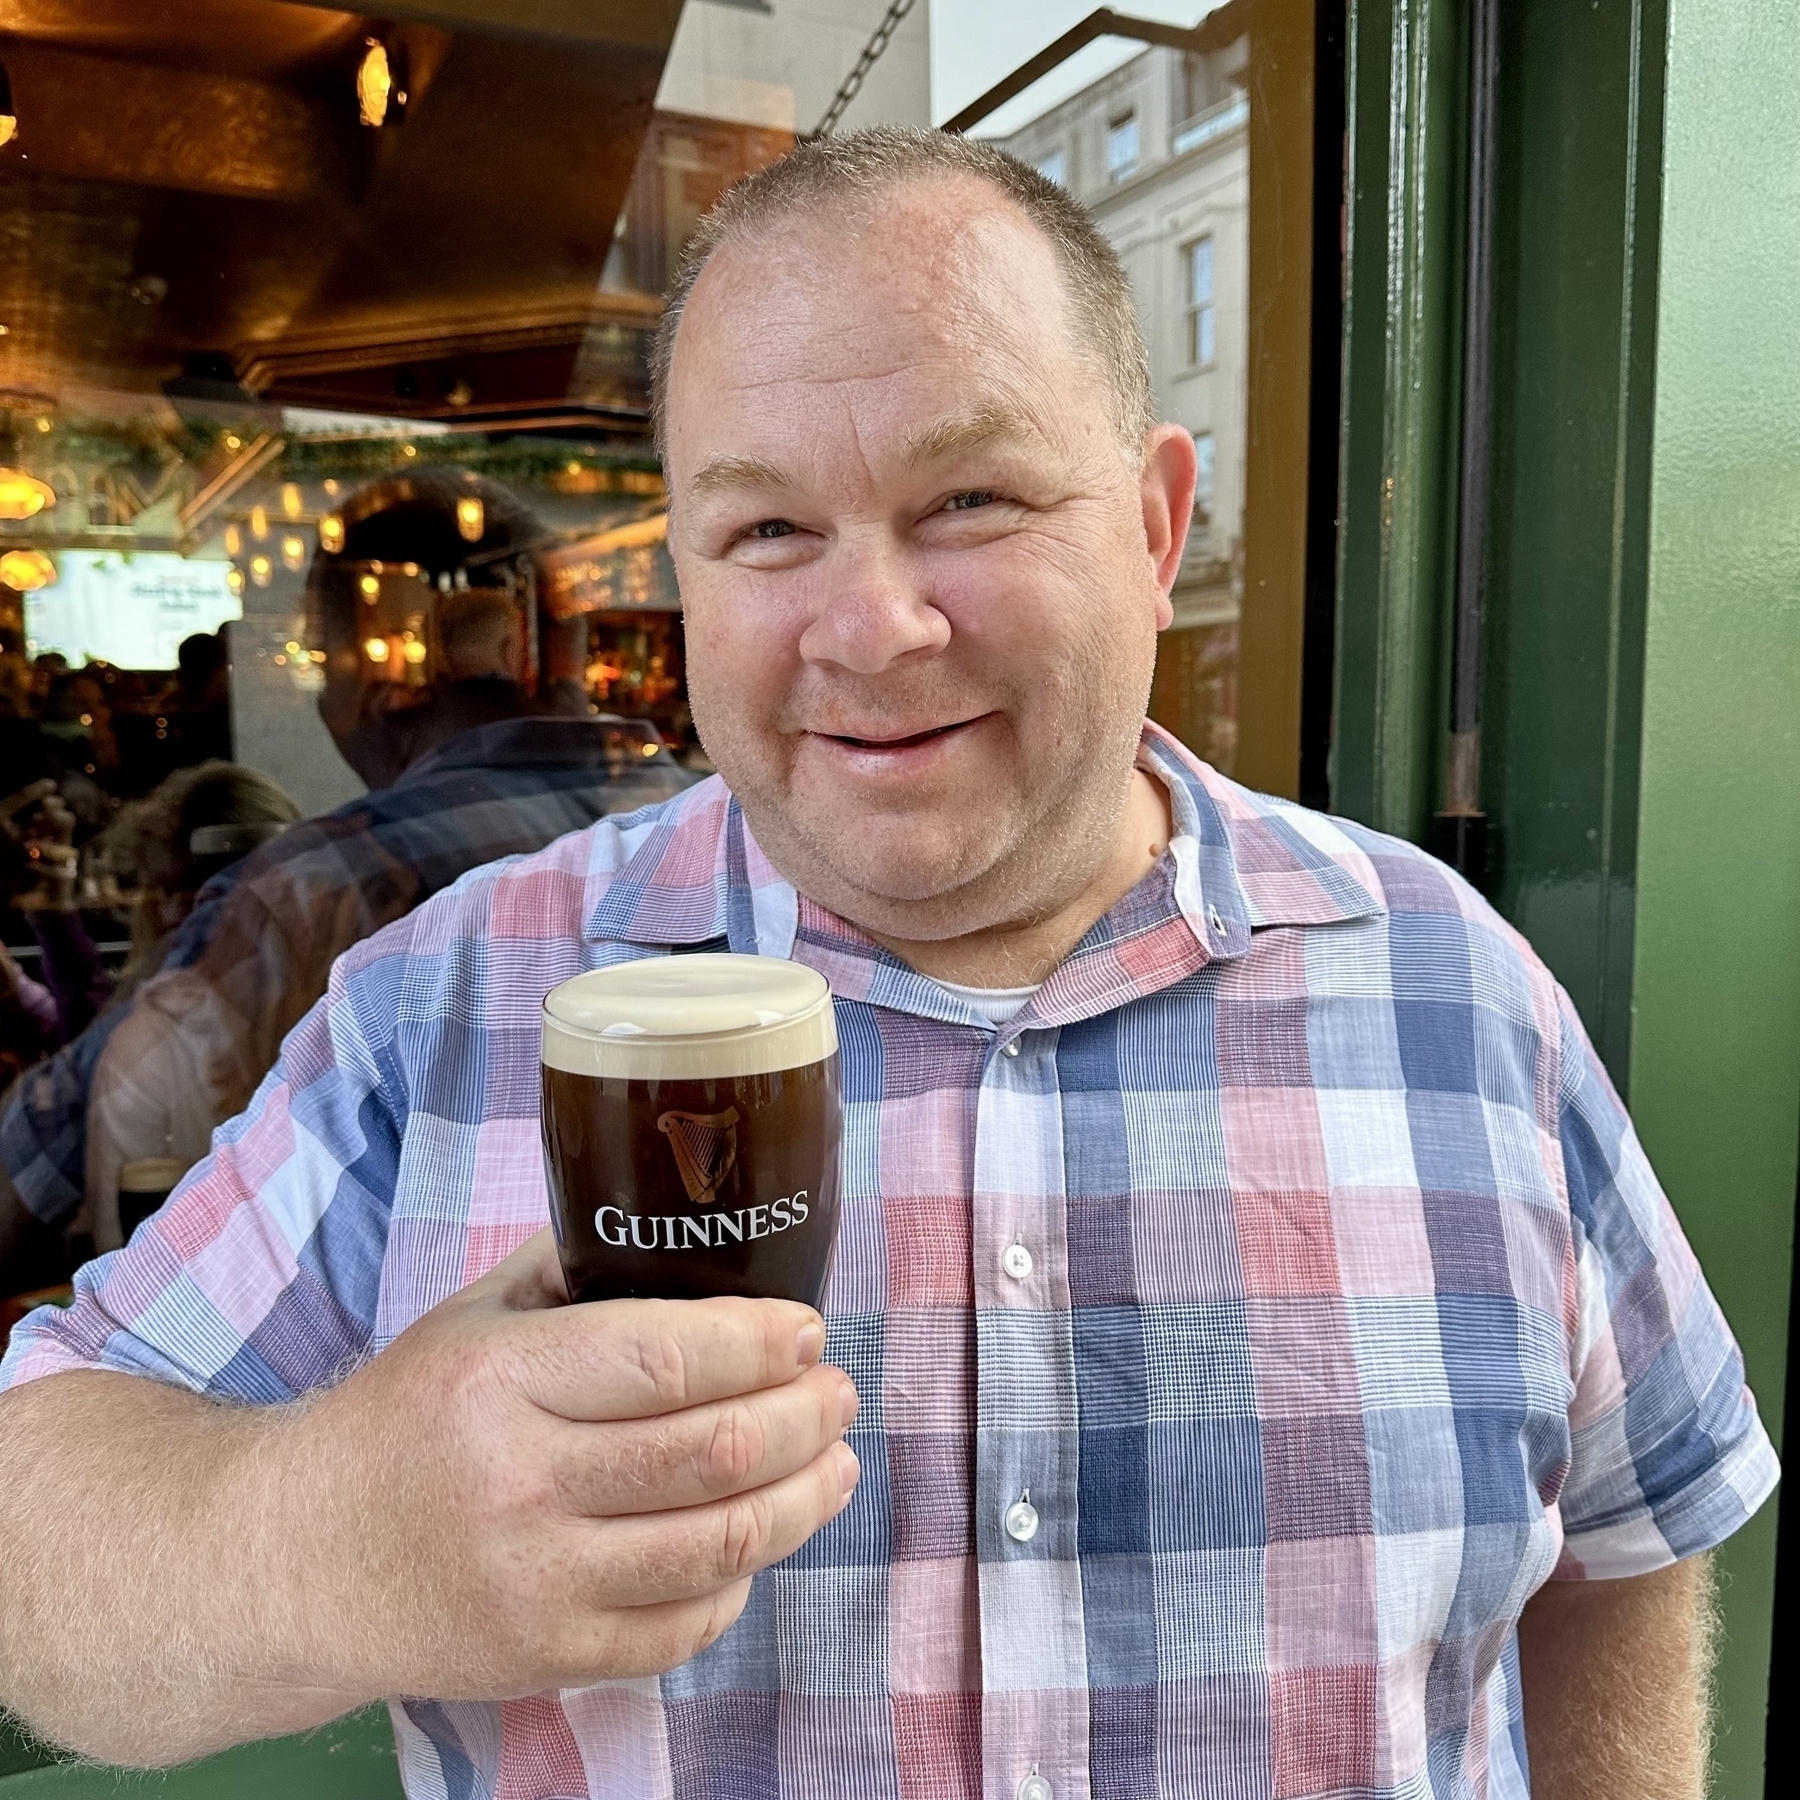 Auto-generated description: A smiling man holds a pint of Guinness while standing in front of a pub.